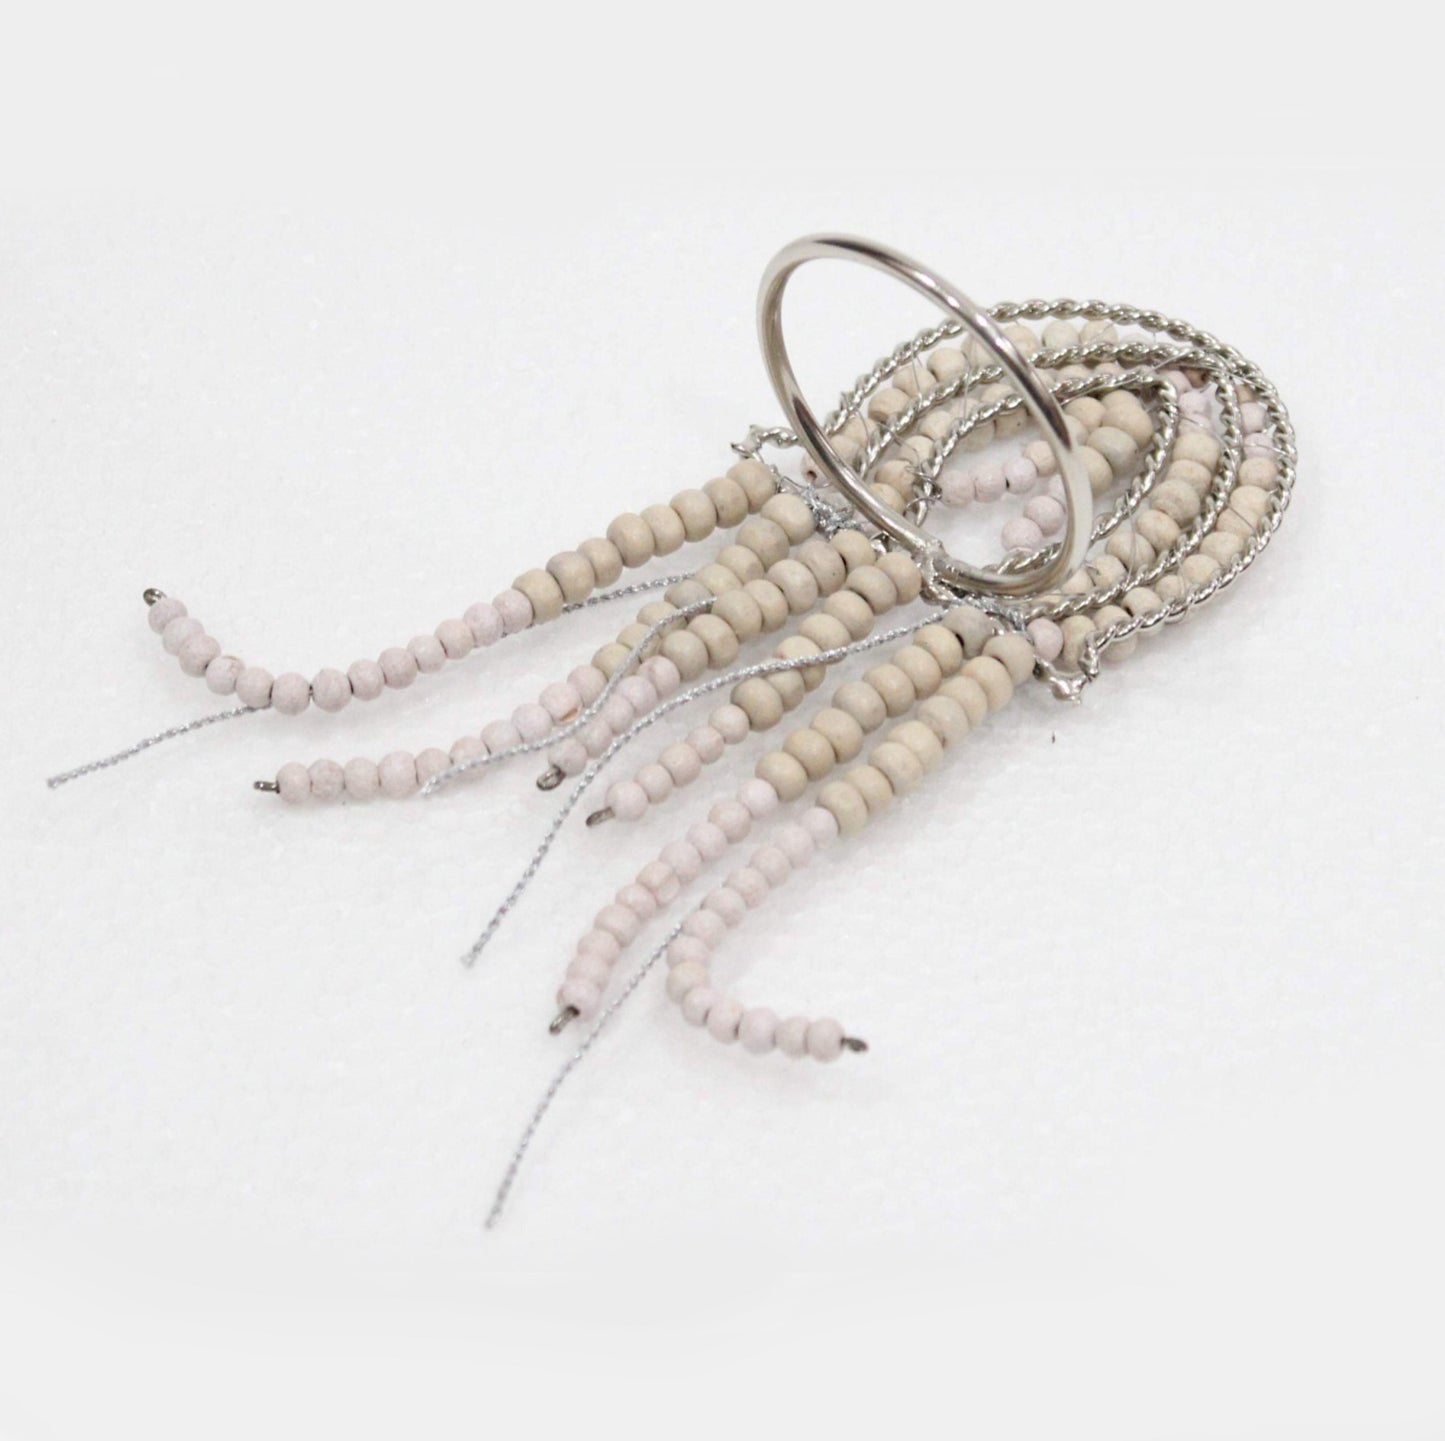 Jellyfish shaped napkin ring crafted of natural beads.